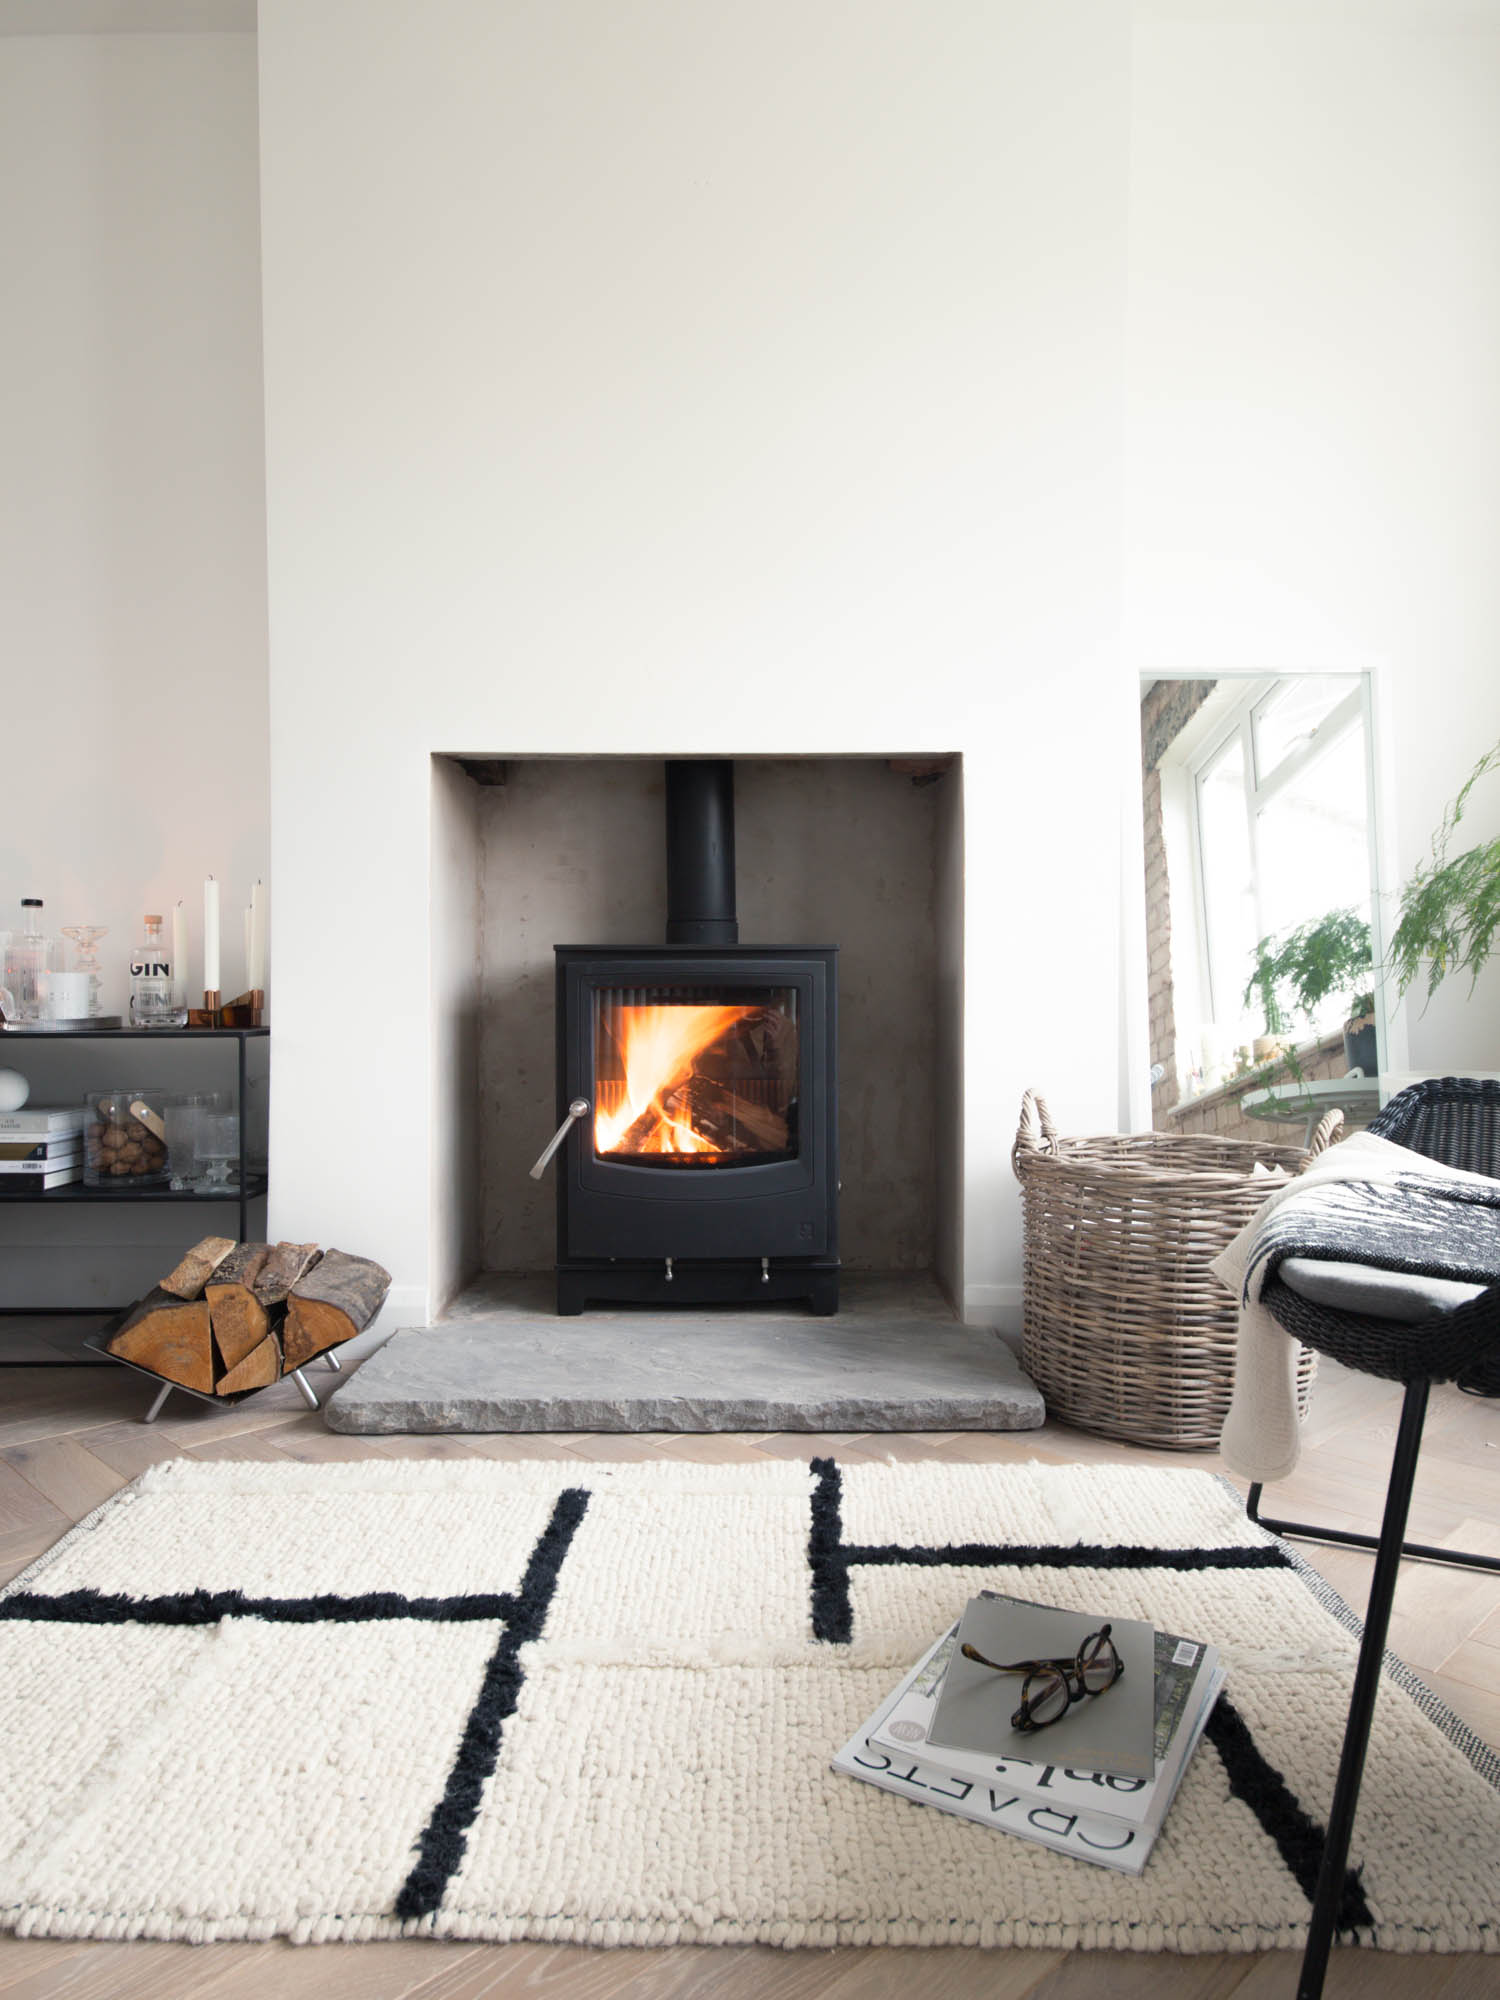 Fireplace and Chimney Authority Luxury Installing A Wood Burning Stove A Step by Step Guide